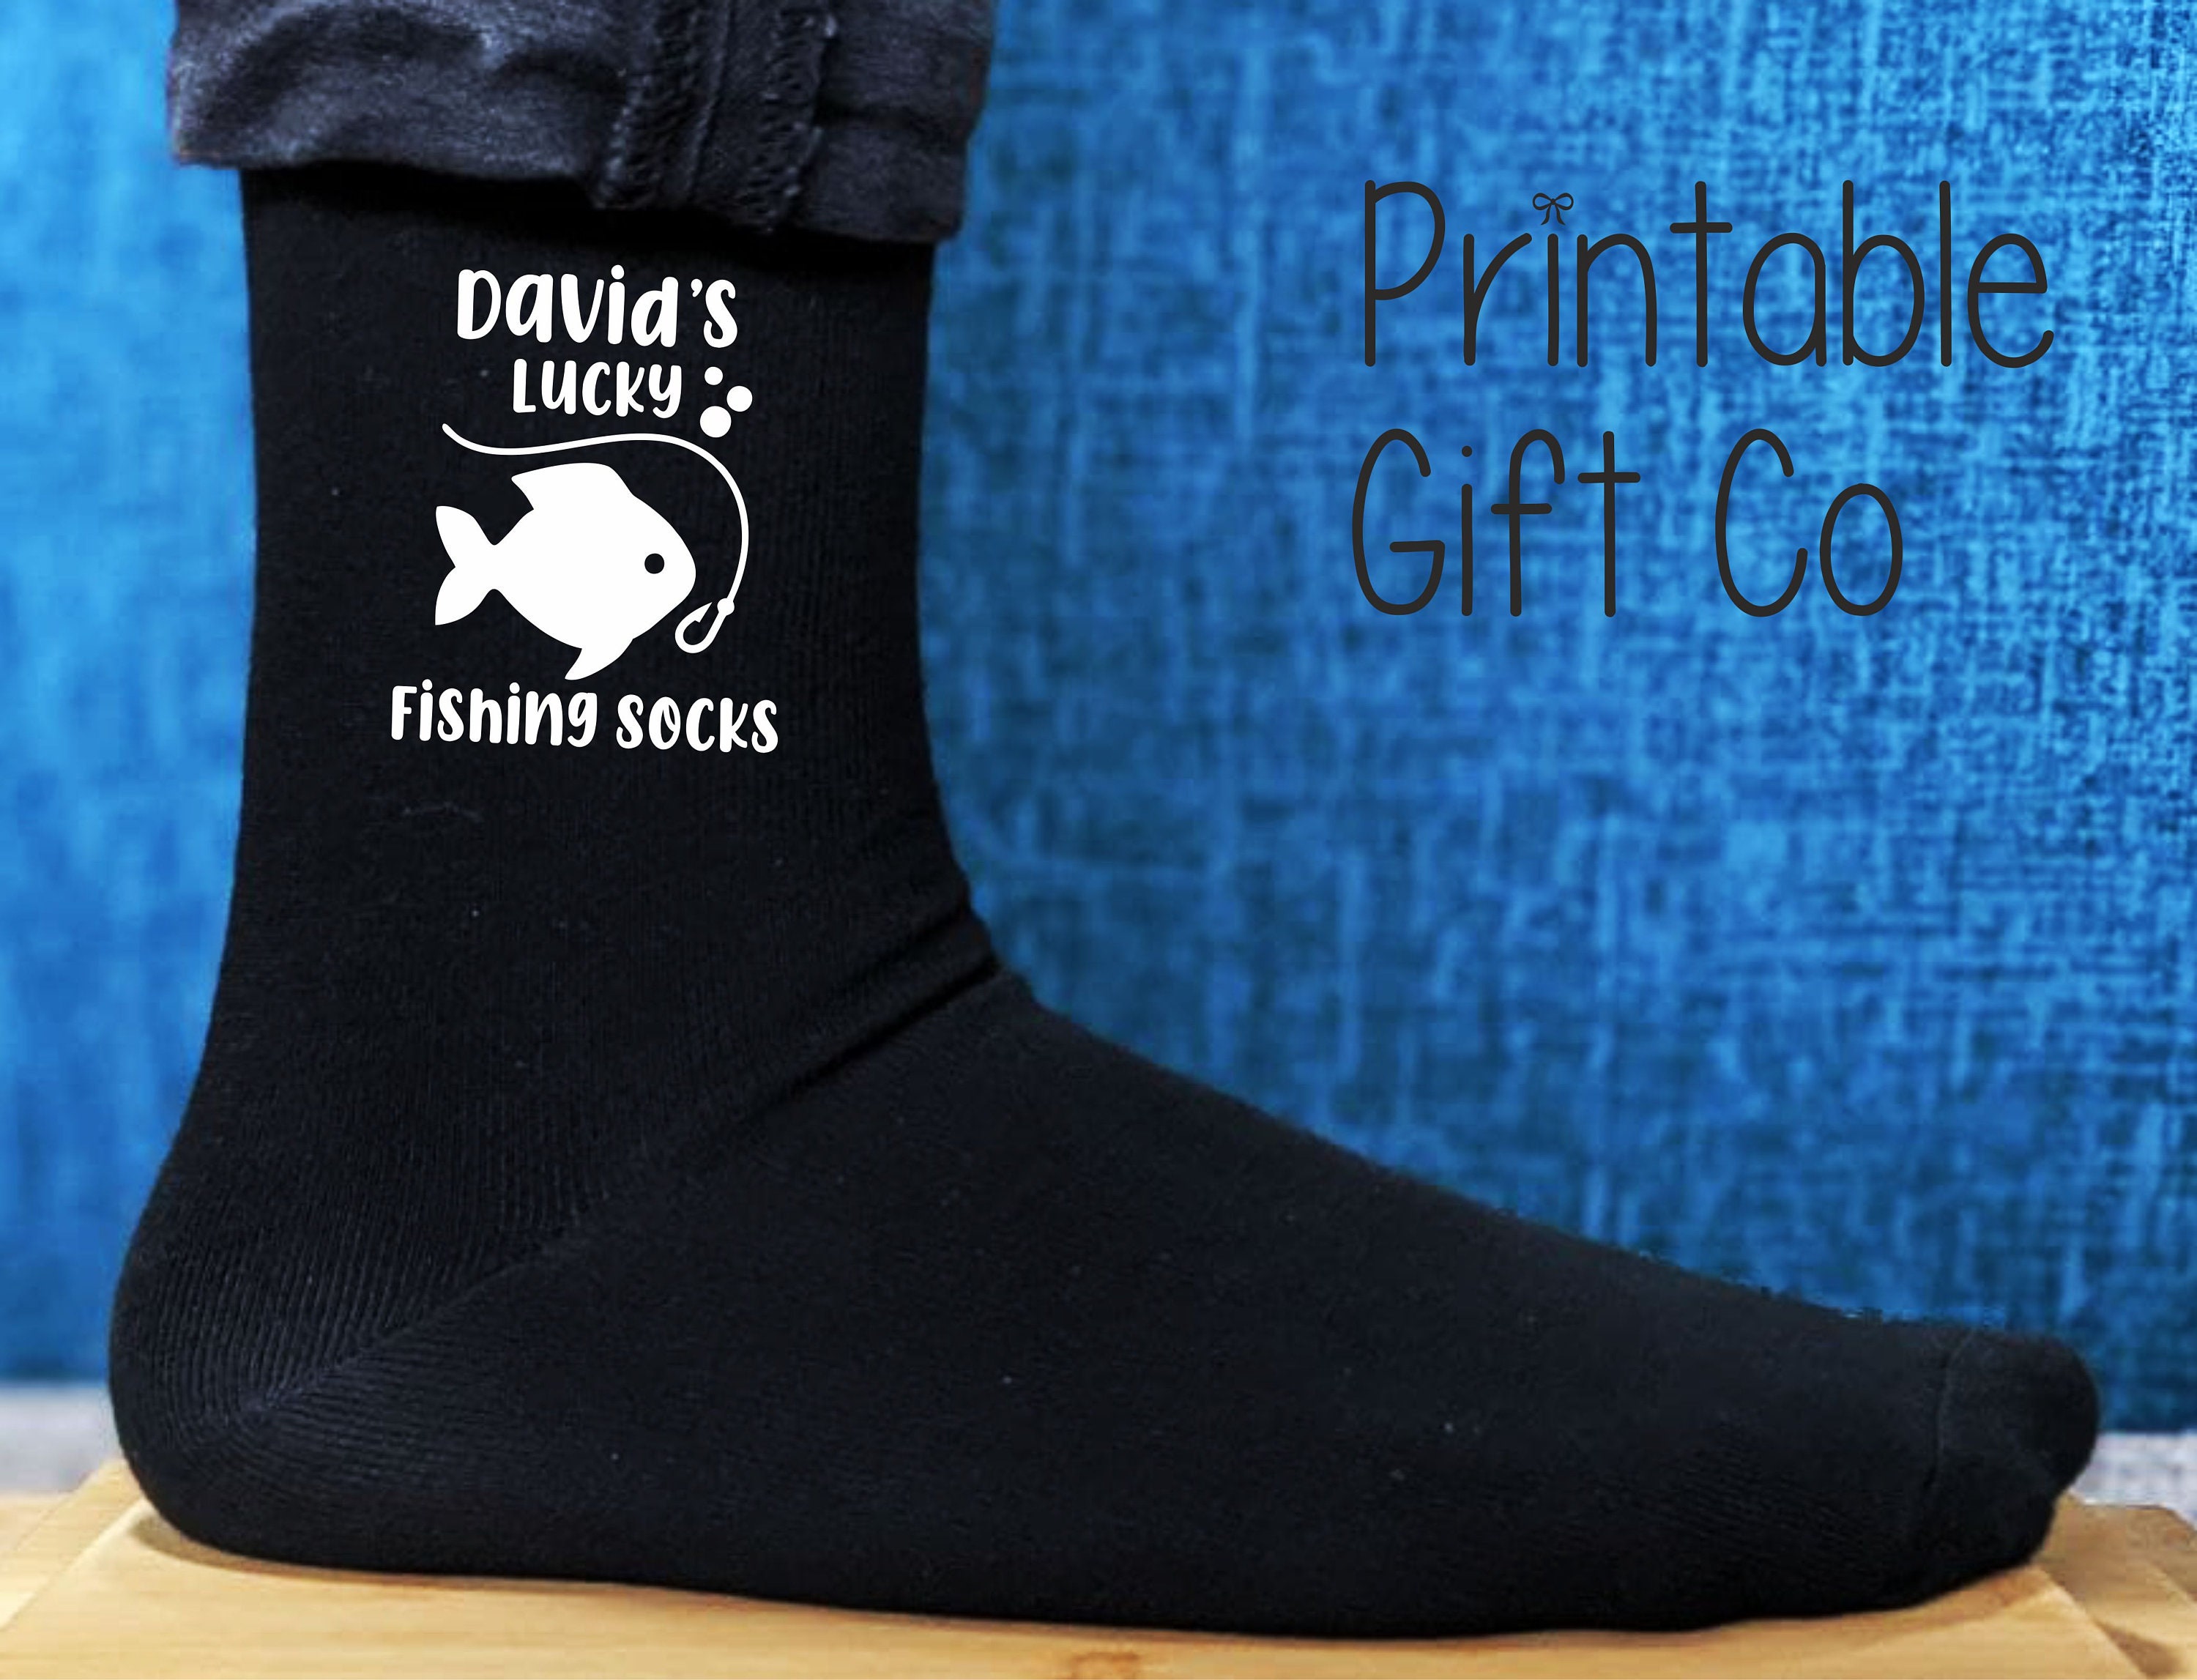 Uncle's Lucky Fishing Socks Printed and Personalised Men's Gift